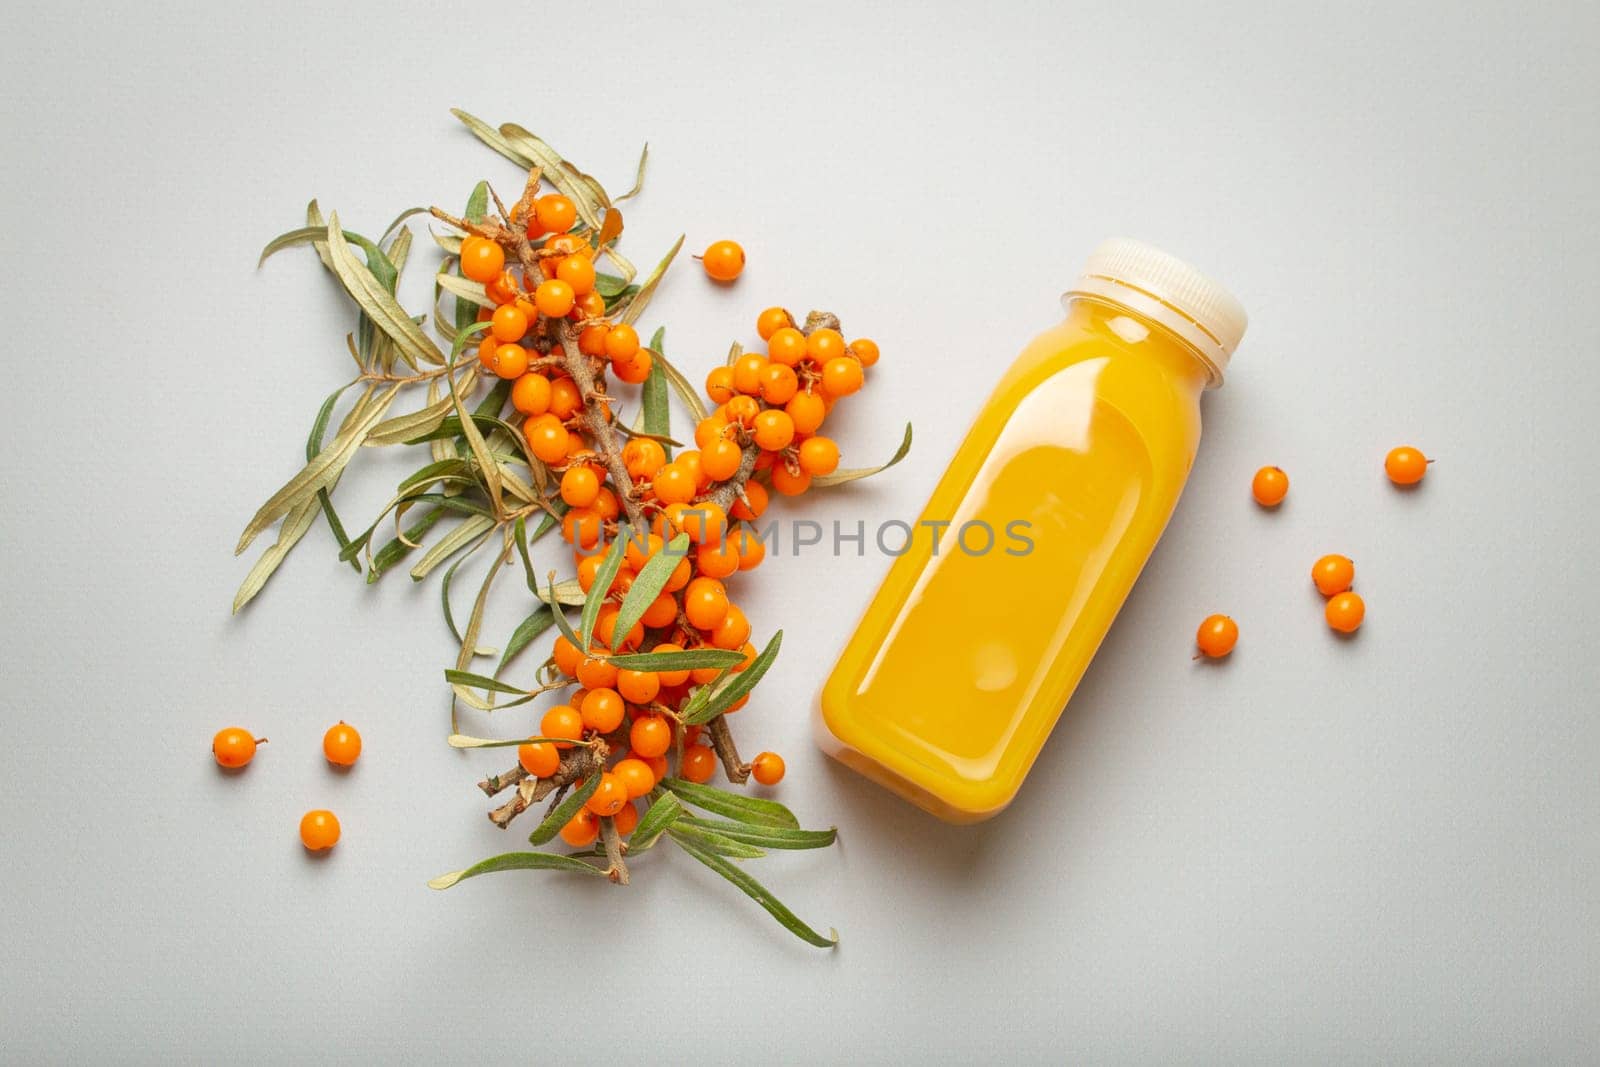 Sea buckthorn healthy juicy drink in bottle and branches with leaves and ripe berries top view on light grey simple background. by its_al_dente